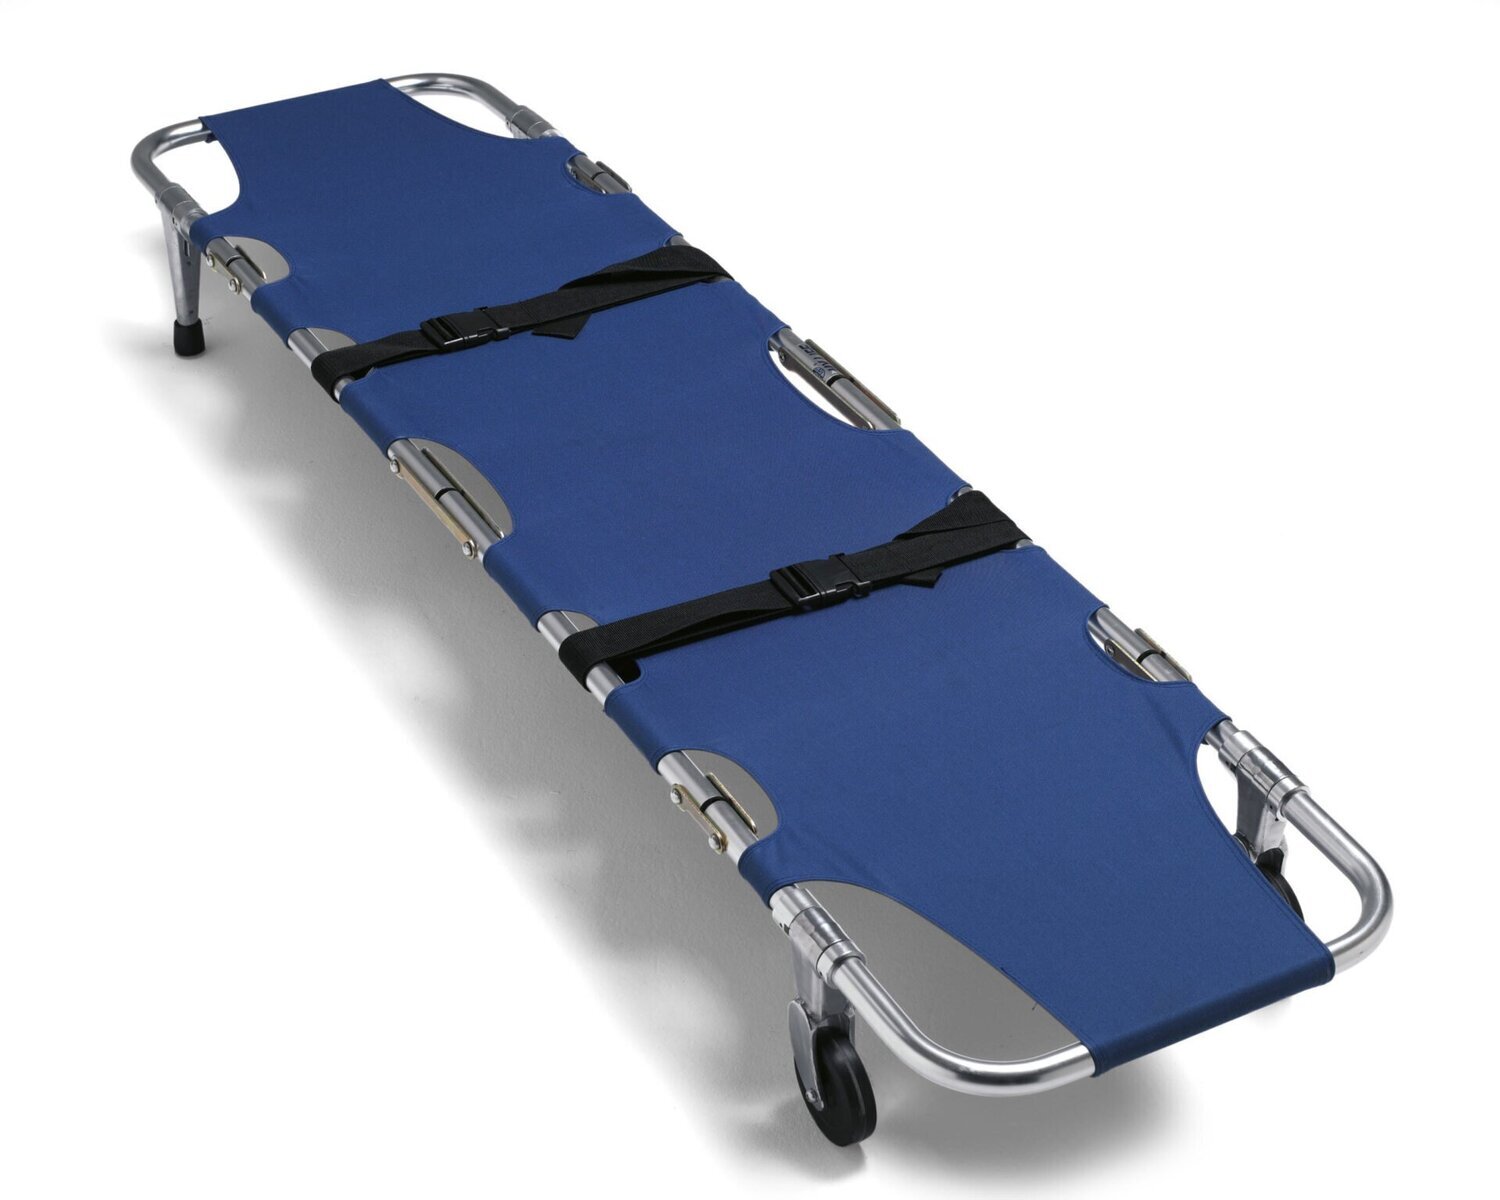 Four parts foldable recovery stretcher